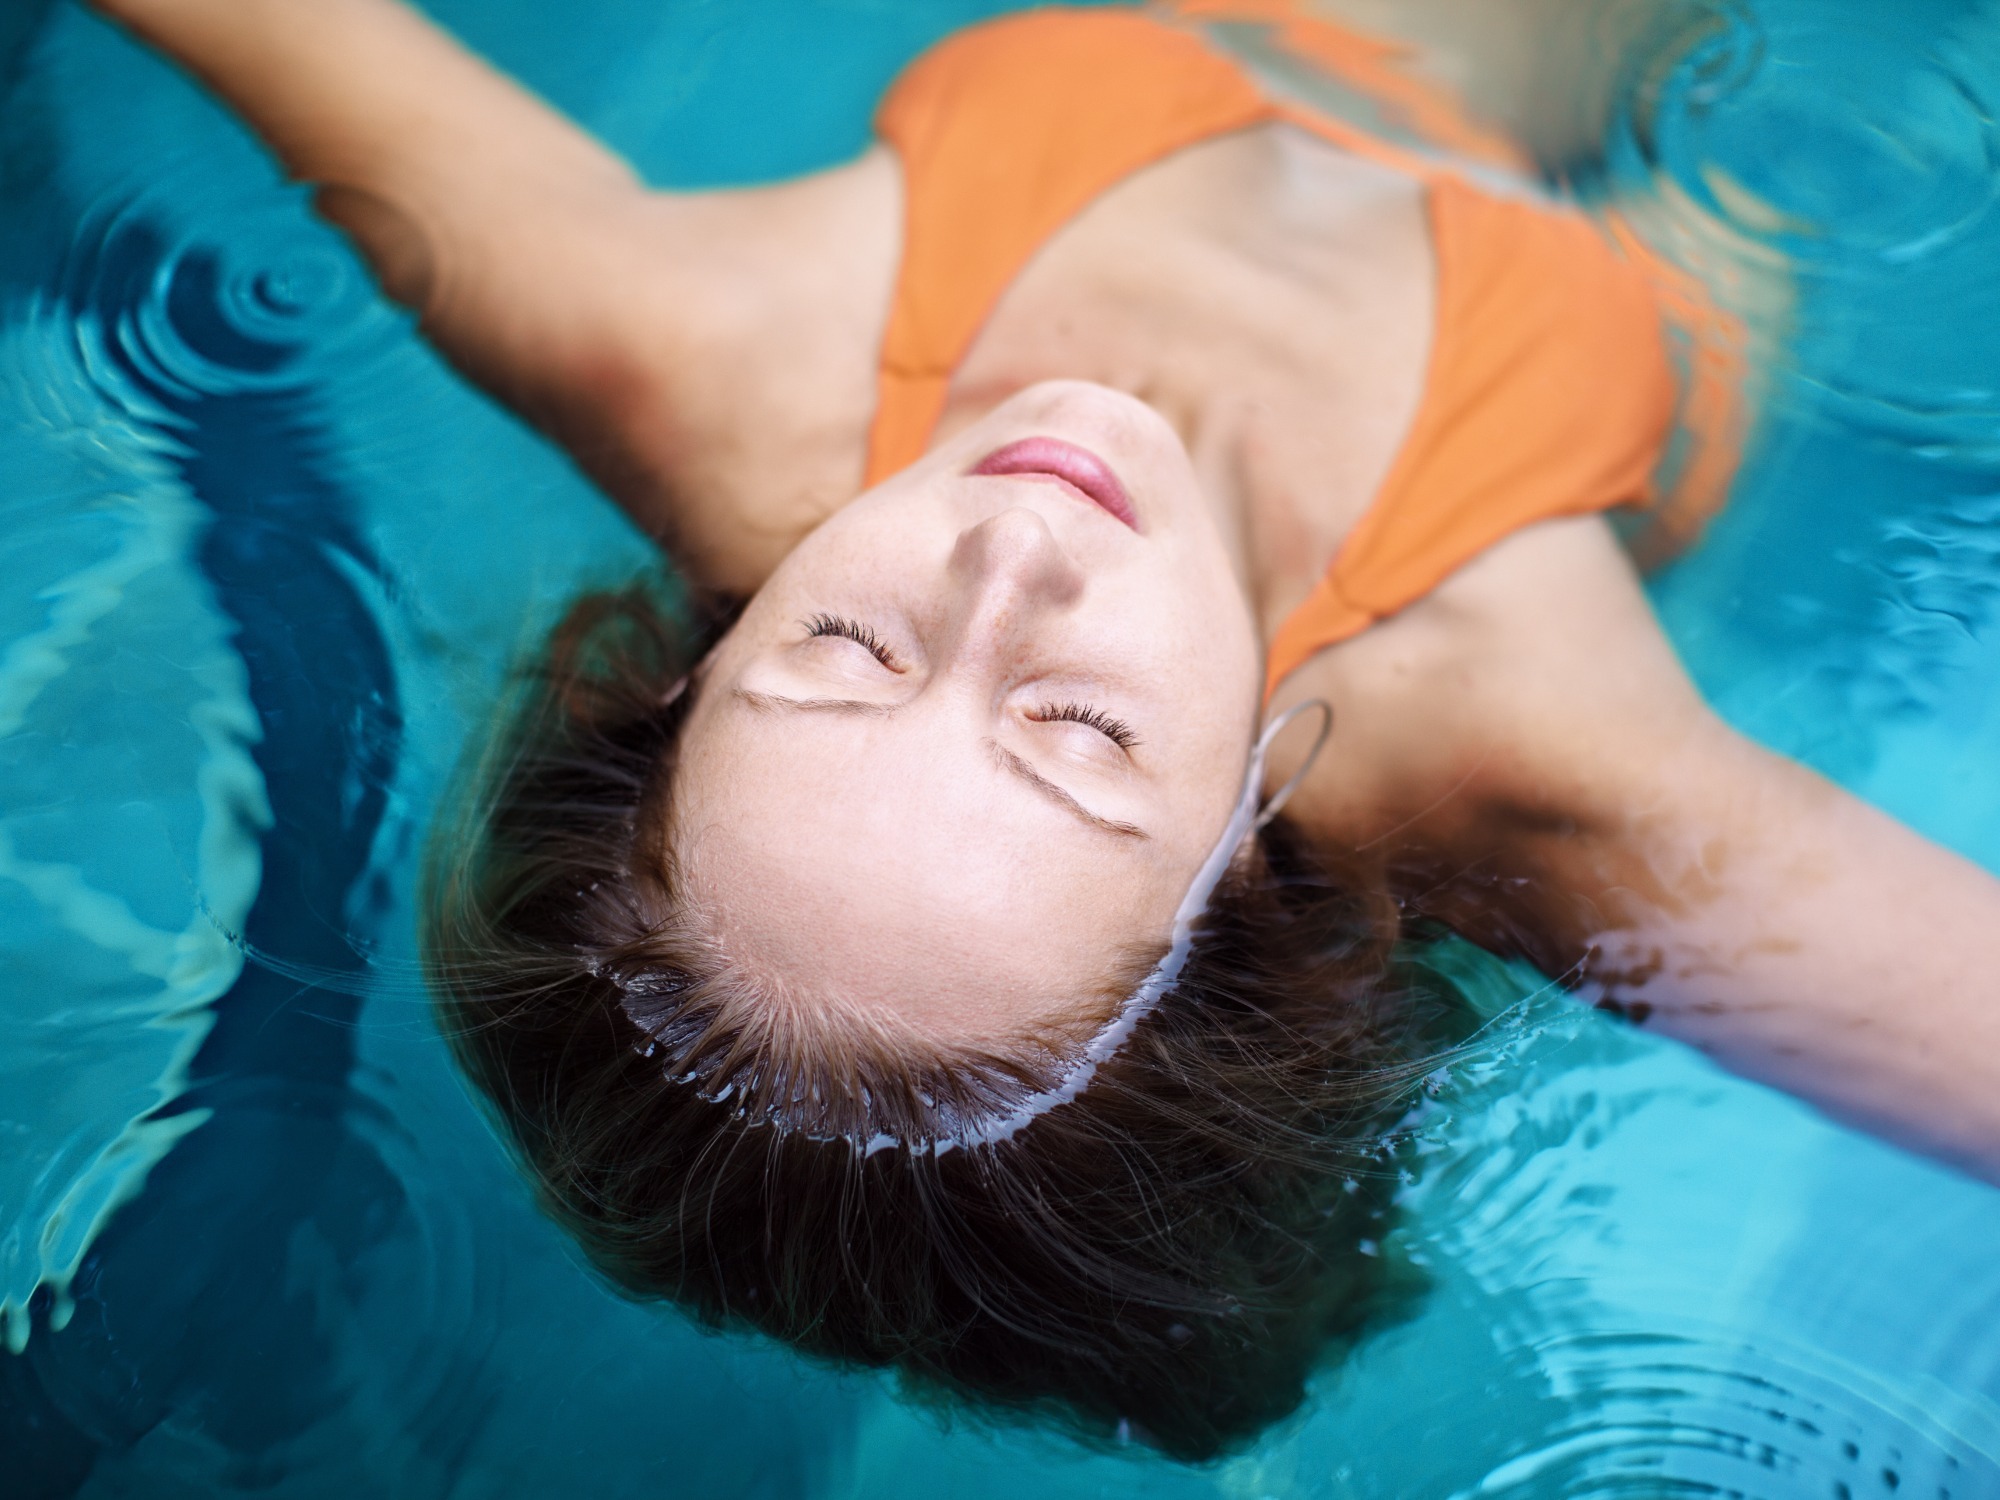 Feeling weightless in immersion therapy